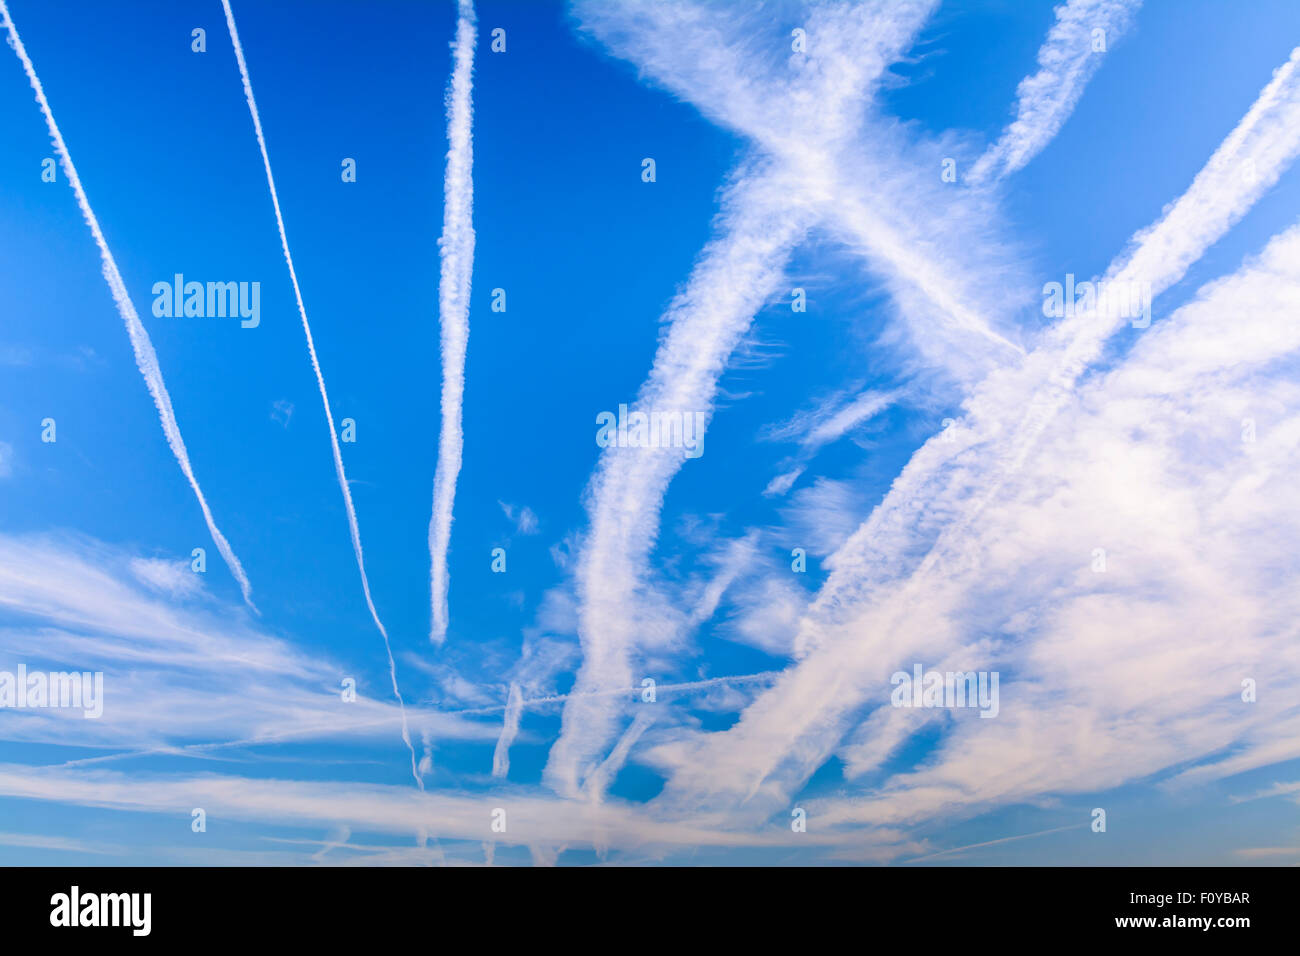 Condensation vapour trails (contrails) from jet engines on aircraft, in blue sky. Aeroplanes or airplane pollution. Global warming. Stock Photo